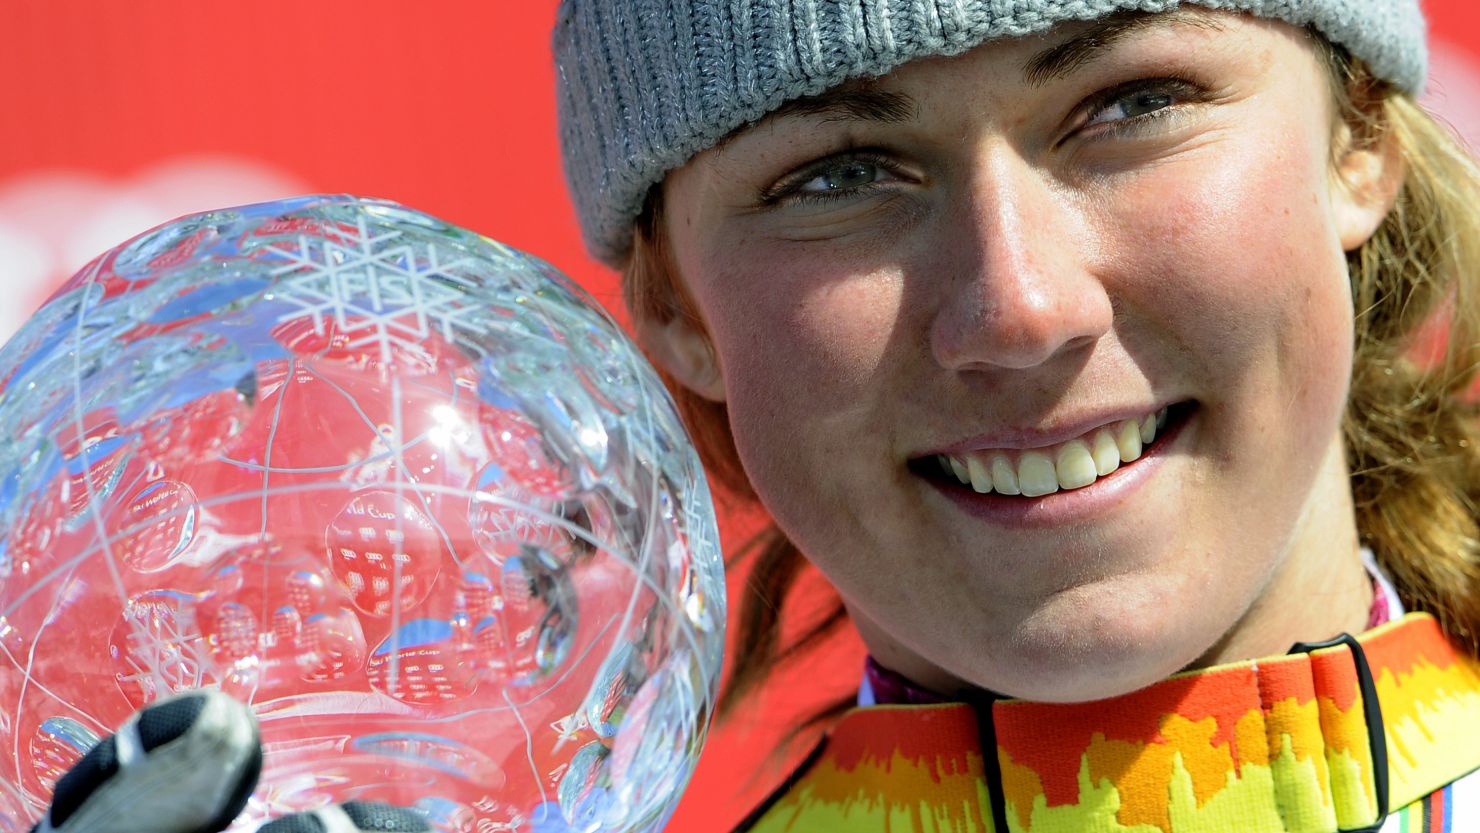 Young U.S. skier Mikaela Shiffrin won the Crystal Globe for the overall World Cup slalom title.